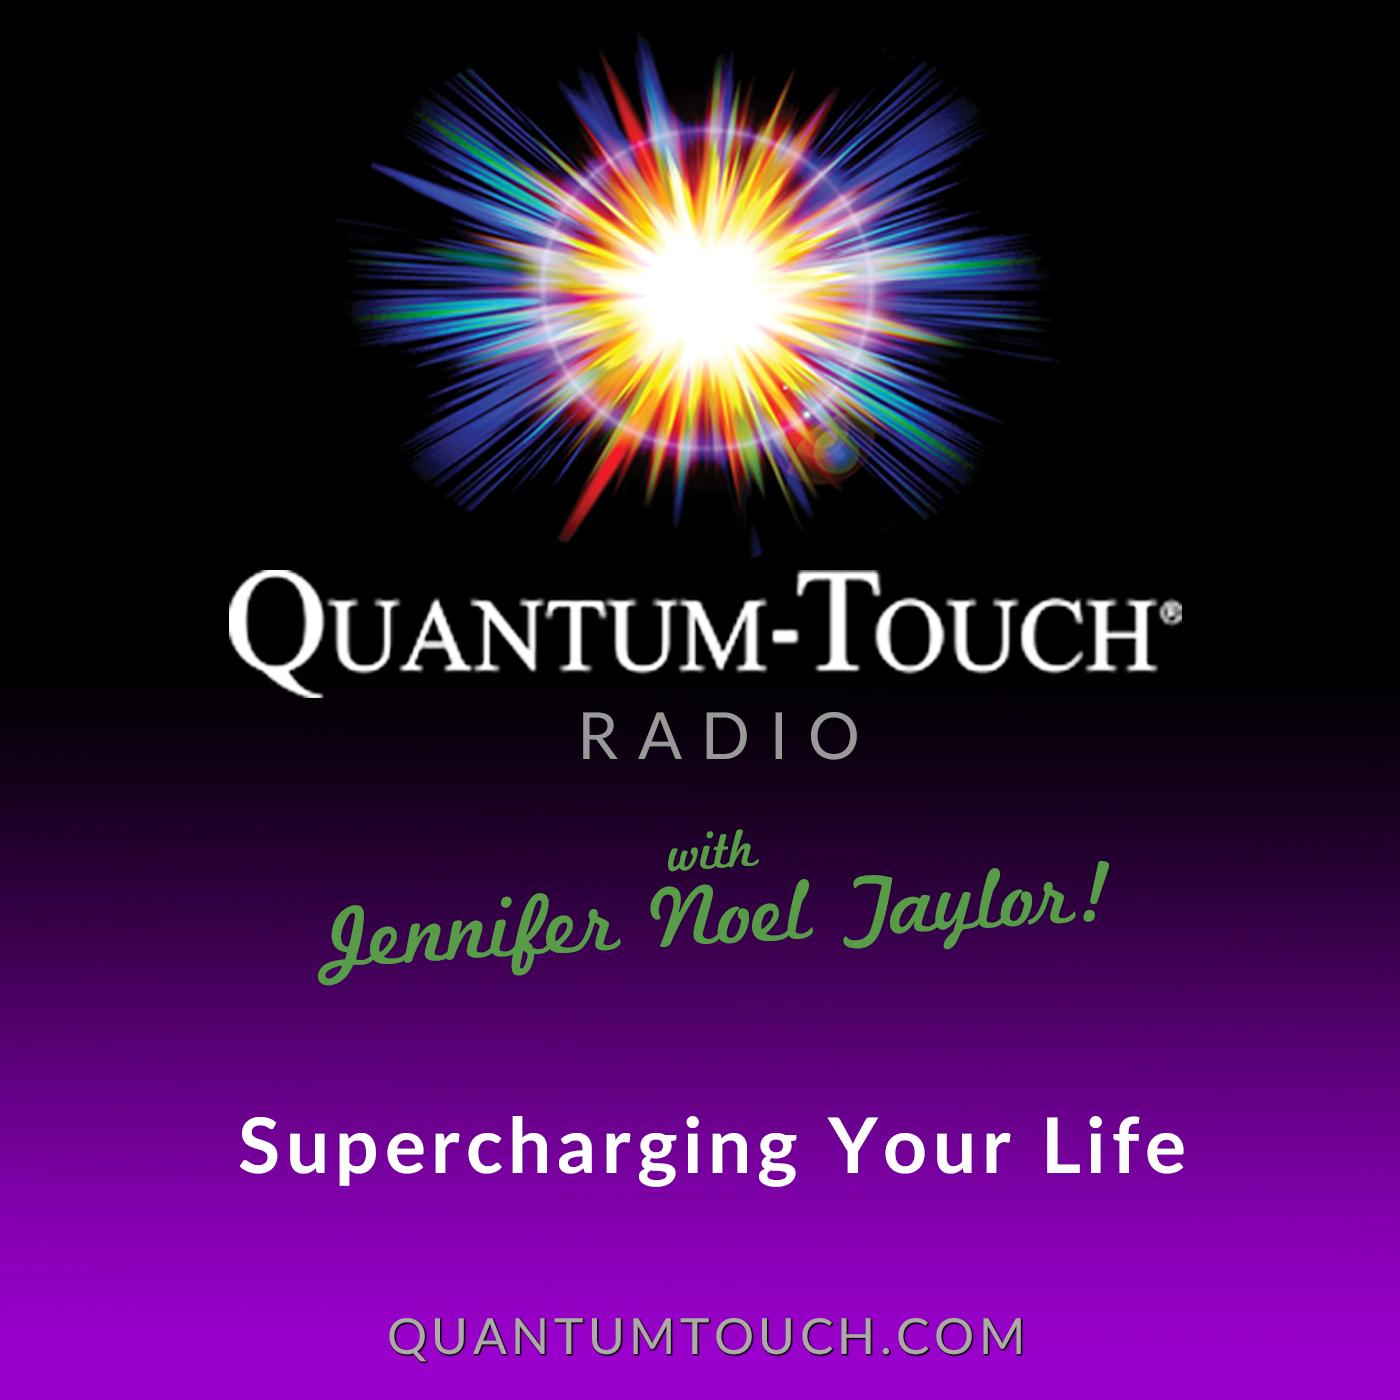 Quantum Touch® Radio with Jennifer Noel Taylor - Supercharging Your Life!